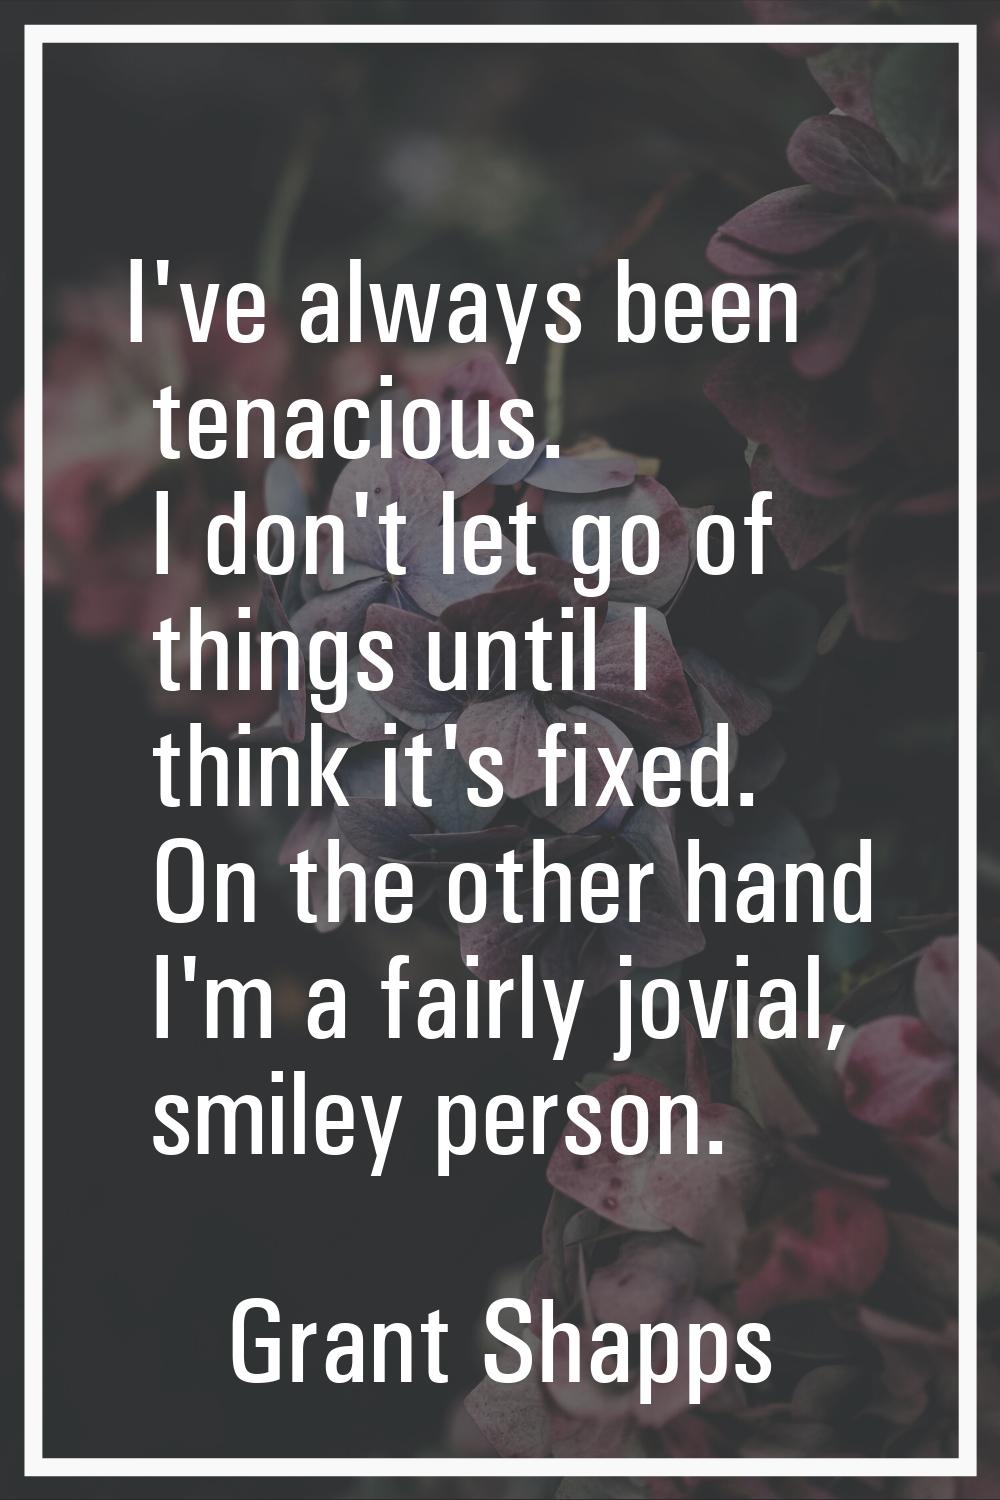 I've always been tenacious. I don't let go of things until I think it's fixed. On the other hand I'